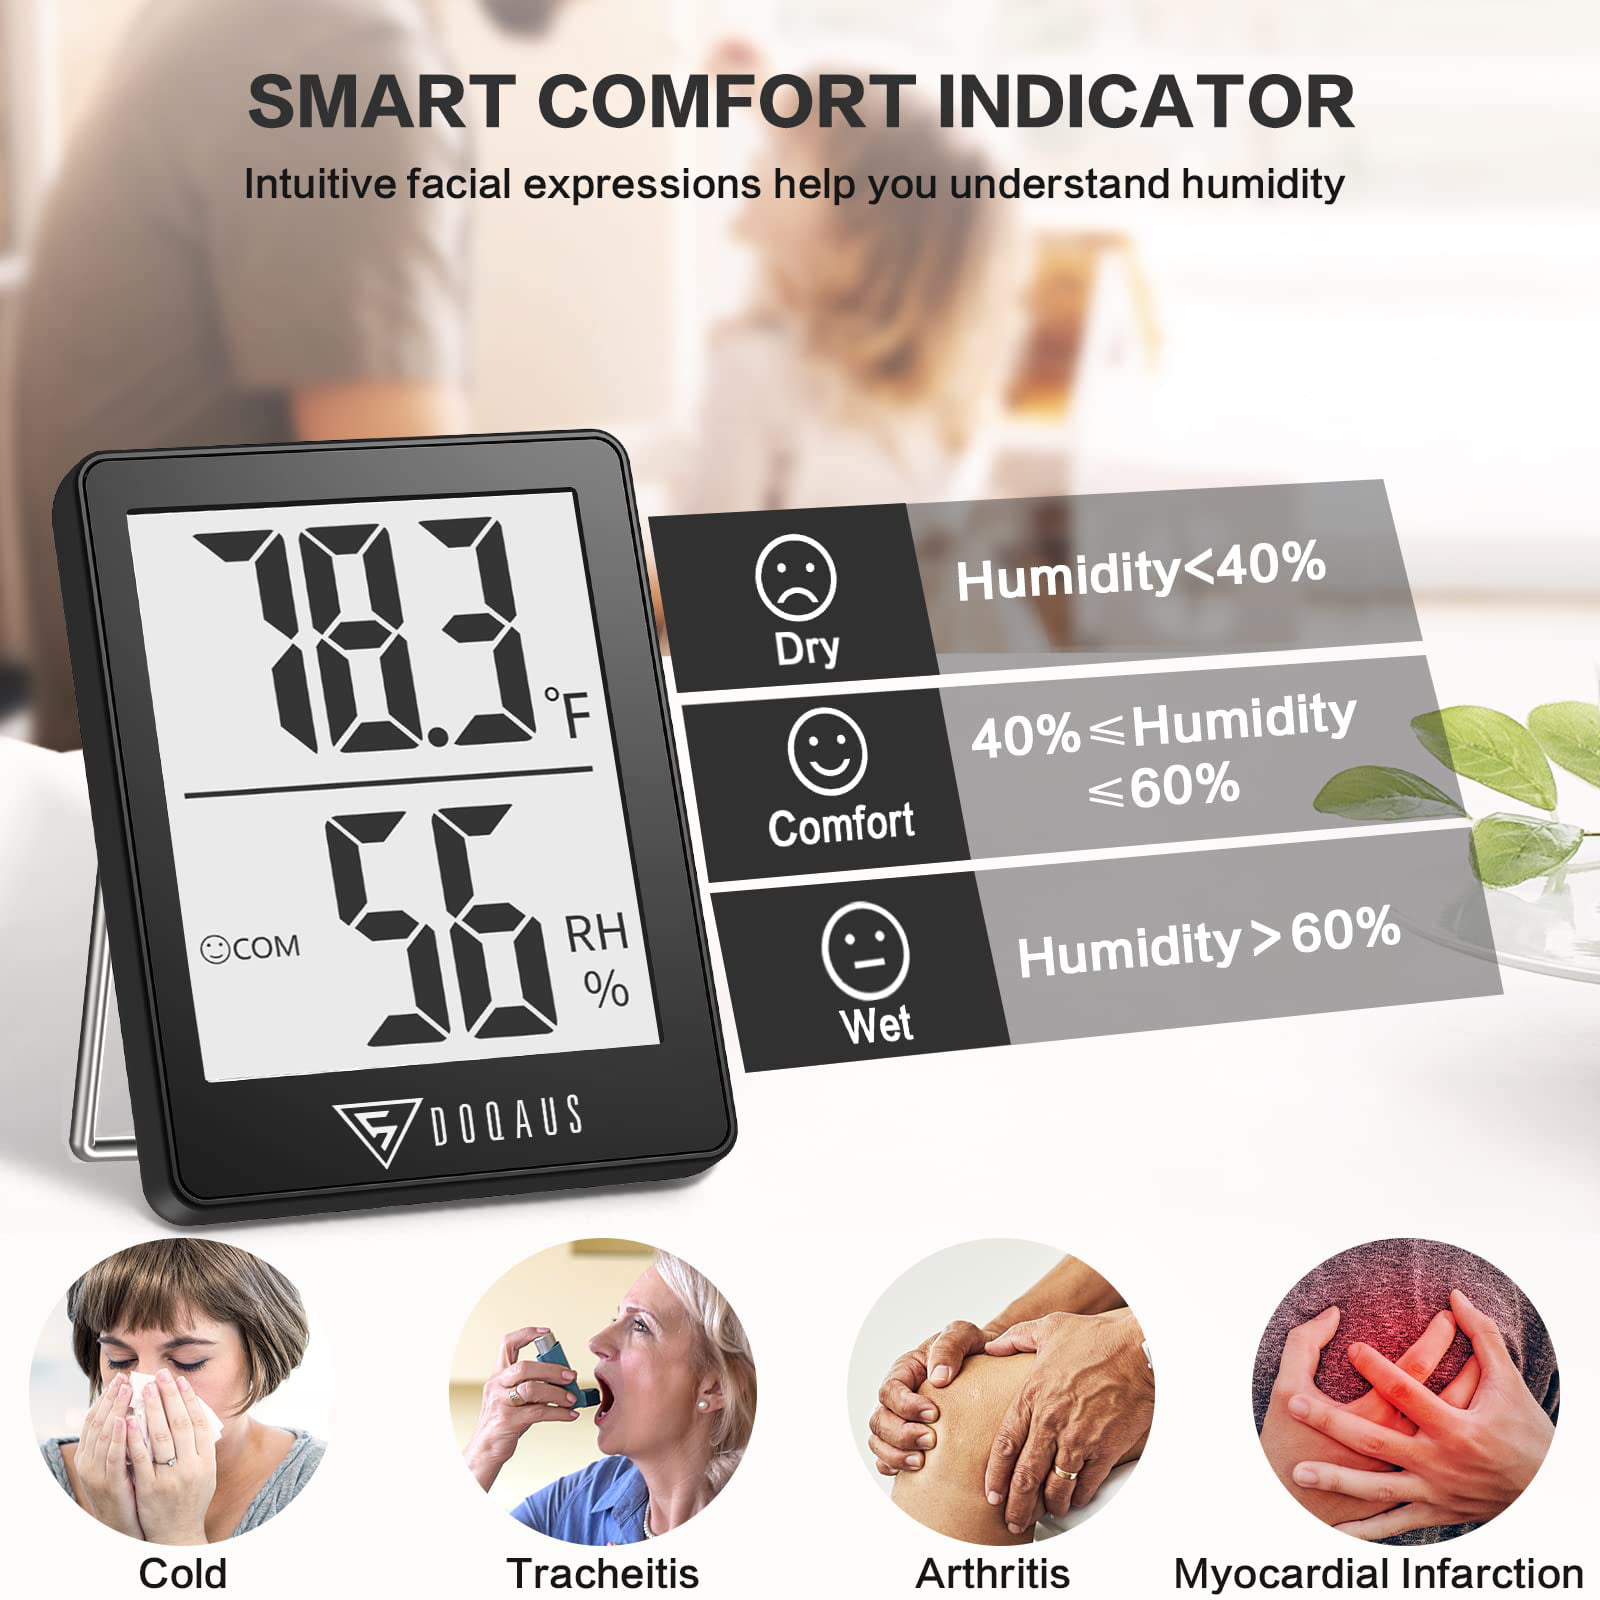 DOQAUS Digital Hygrometer Indoor Thermometer Humidity Gauge Room Thermometer with 5S Fast Refresh Accurate Temperature Humidity Monitor for Home